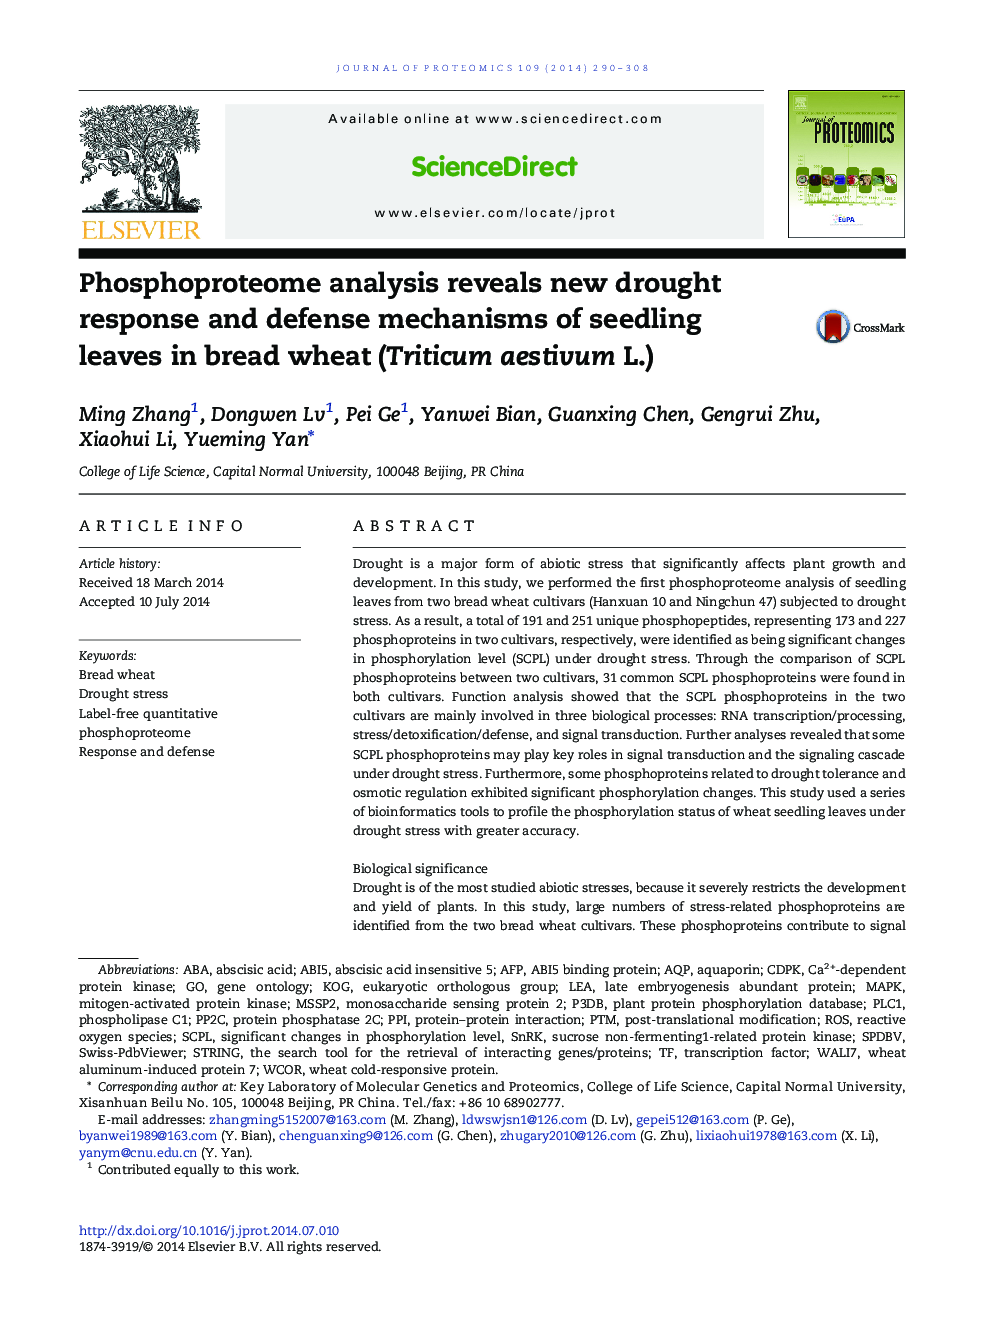 Phosphoproteome analysis reveals new drought response and defense mechanisms of seedling leaves in bread wheat (Triticum aestivum L.)